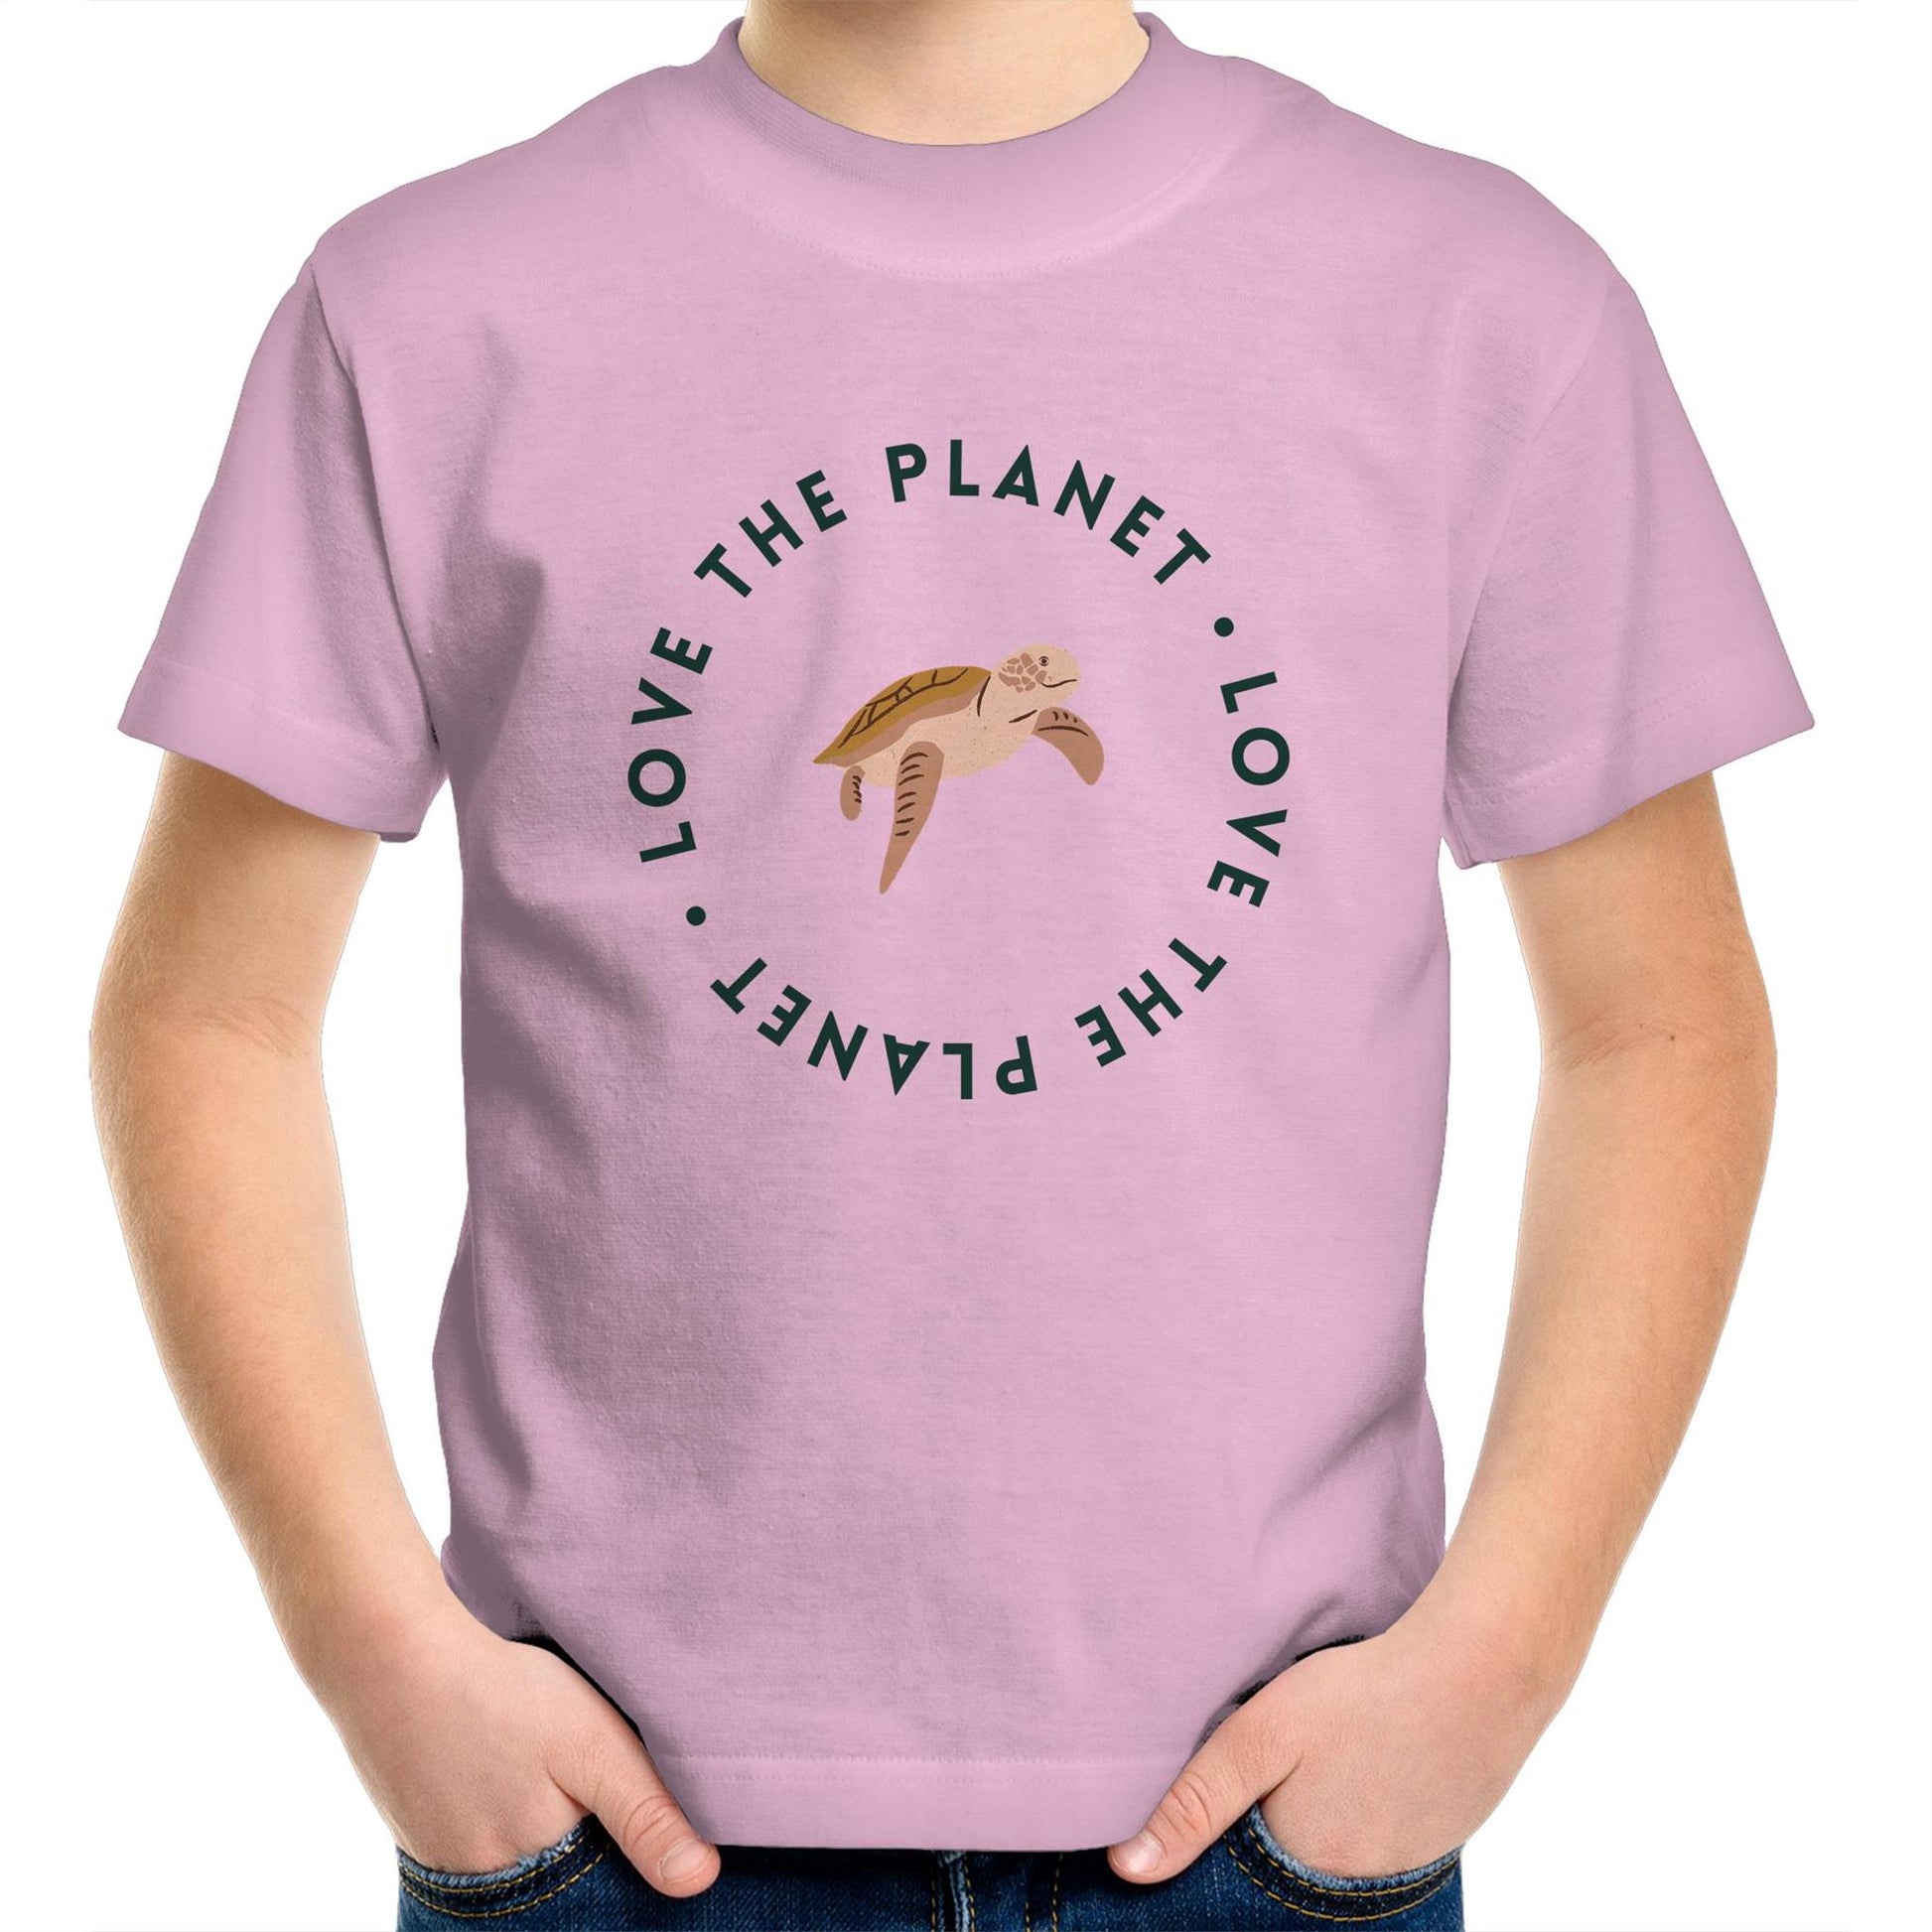 Love The Planet - Kids Youth Crew T-Shirt Pink Kids Youth T-shirt animal Environment